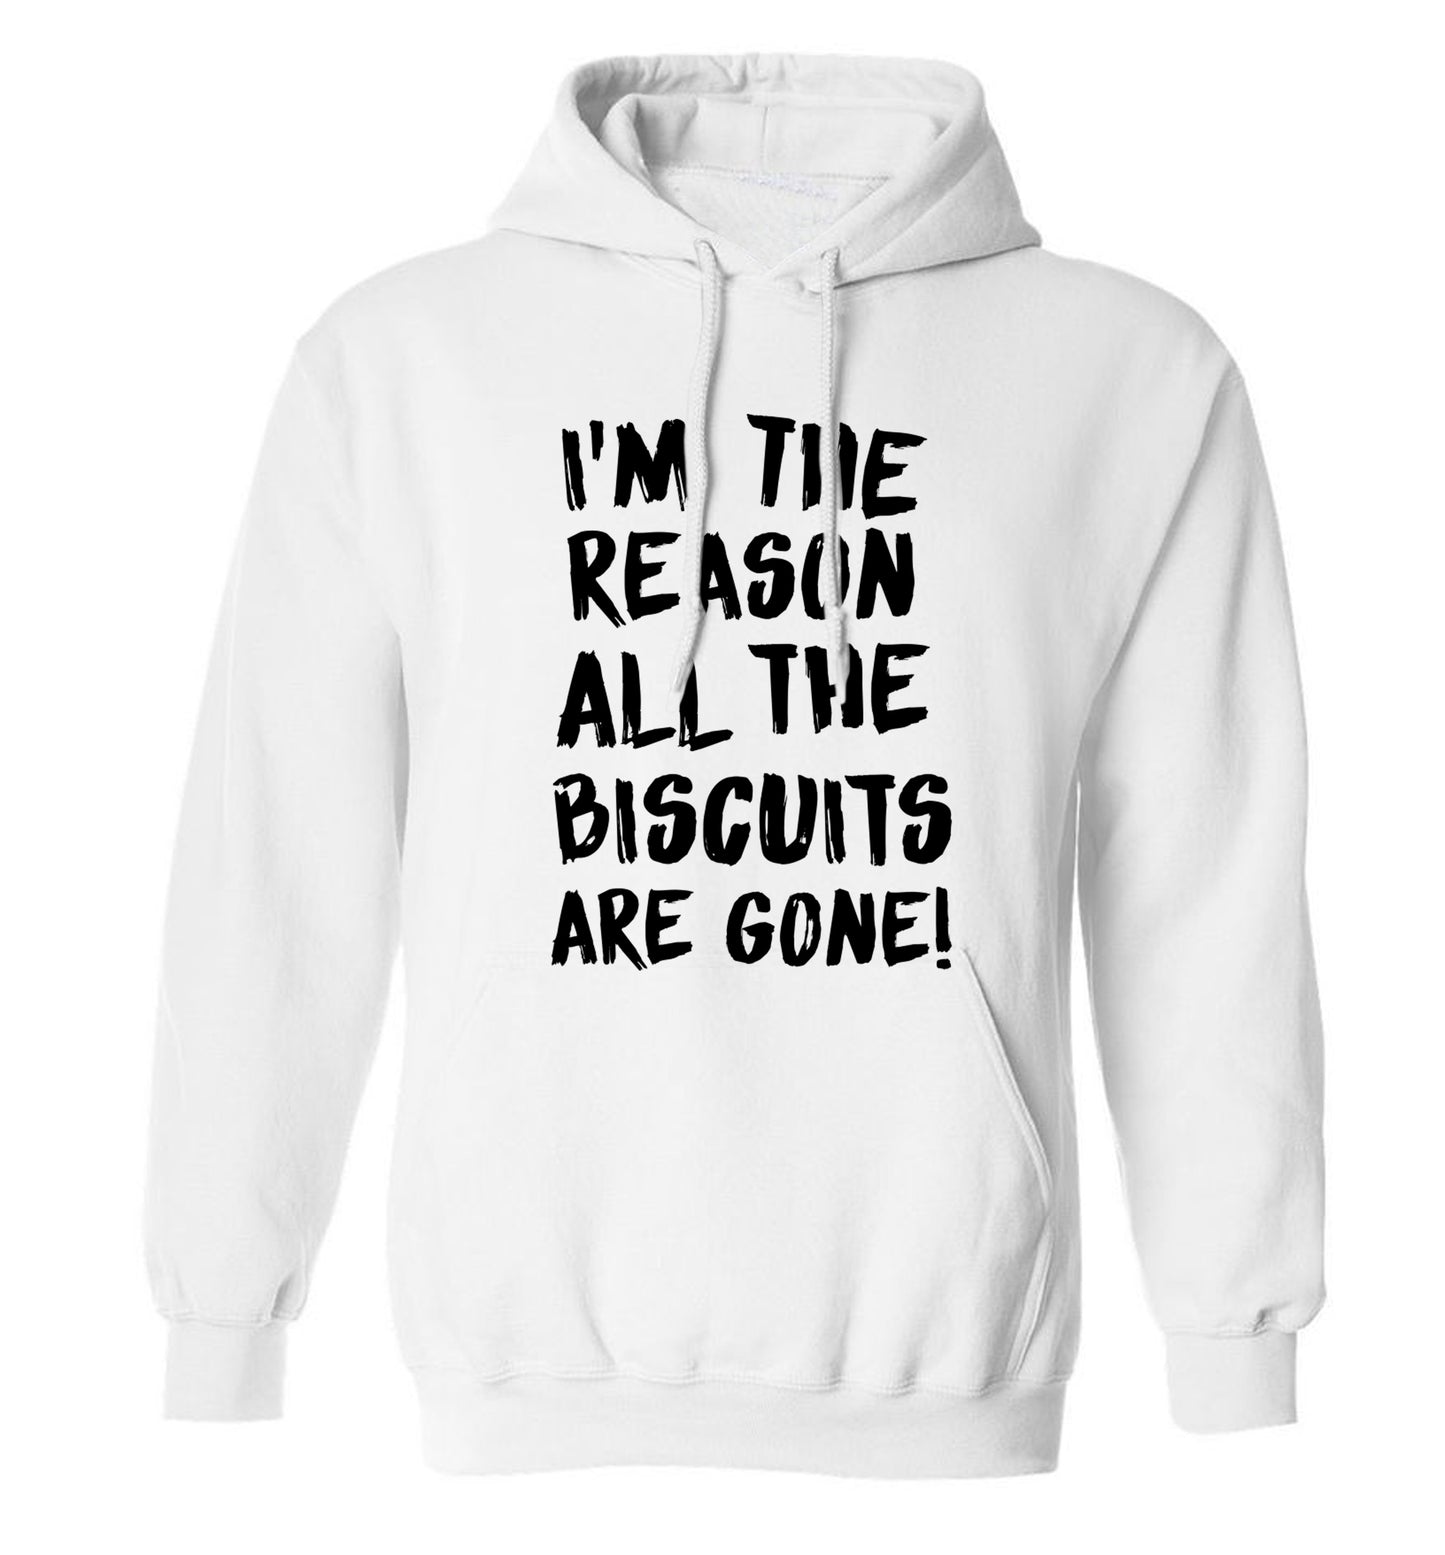 I'm the reason why all the biscuits are gone adults unisex white hoodie 2XL